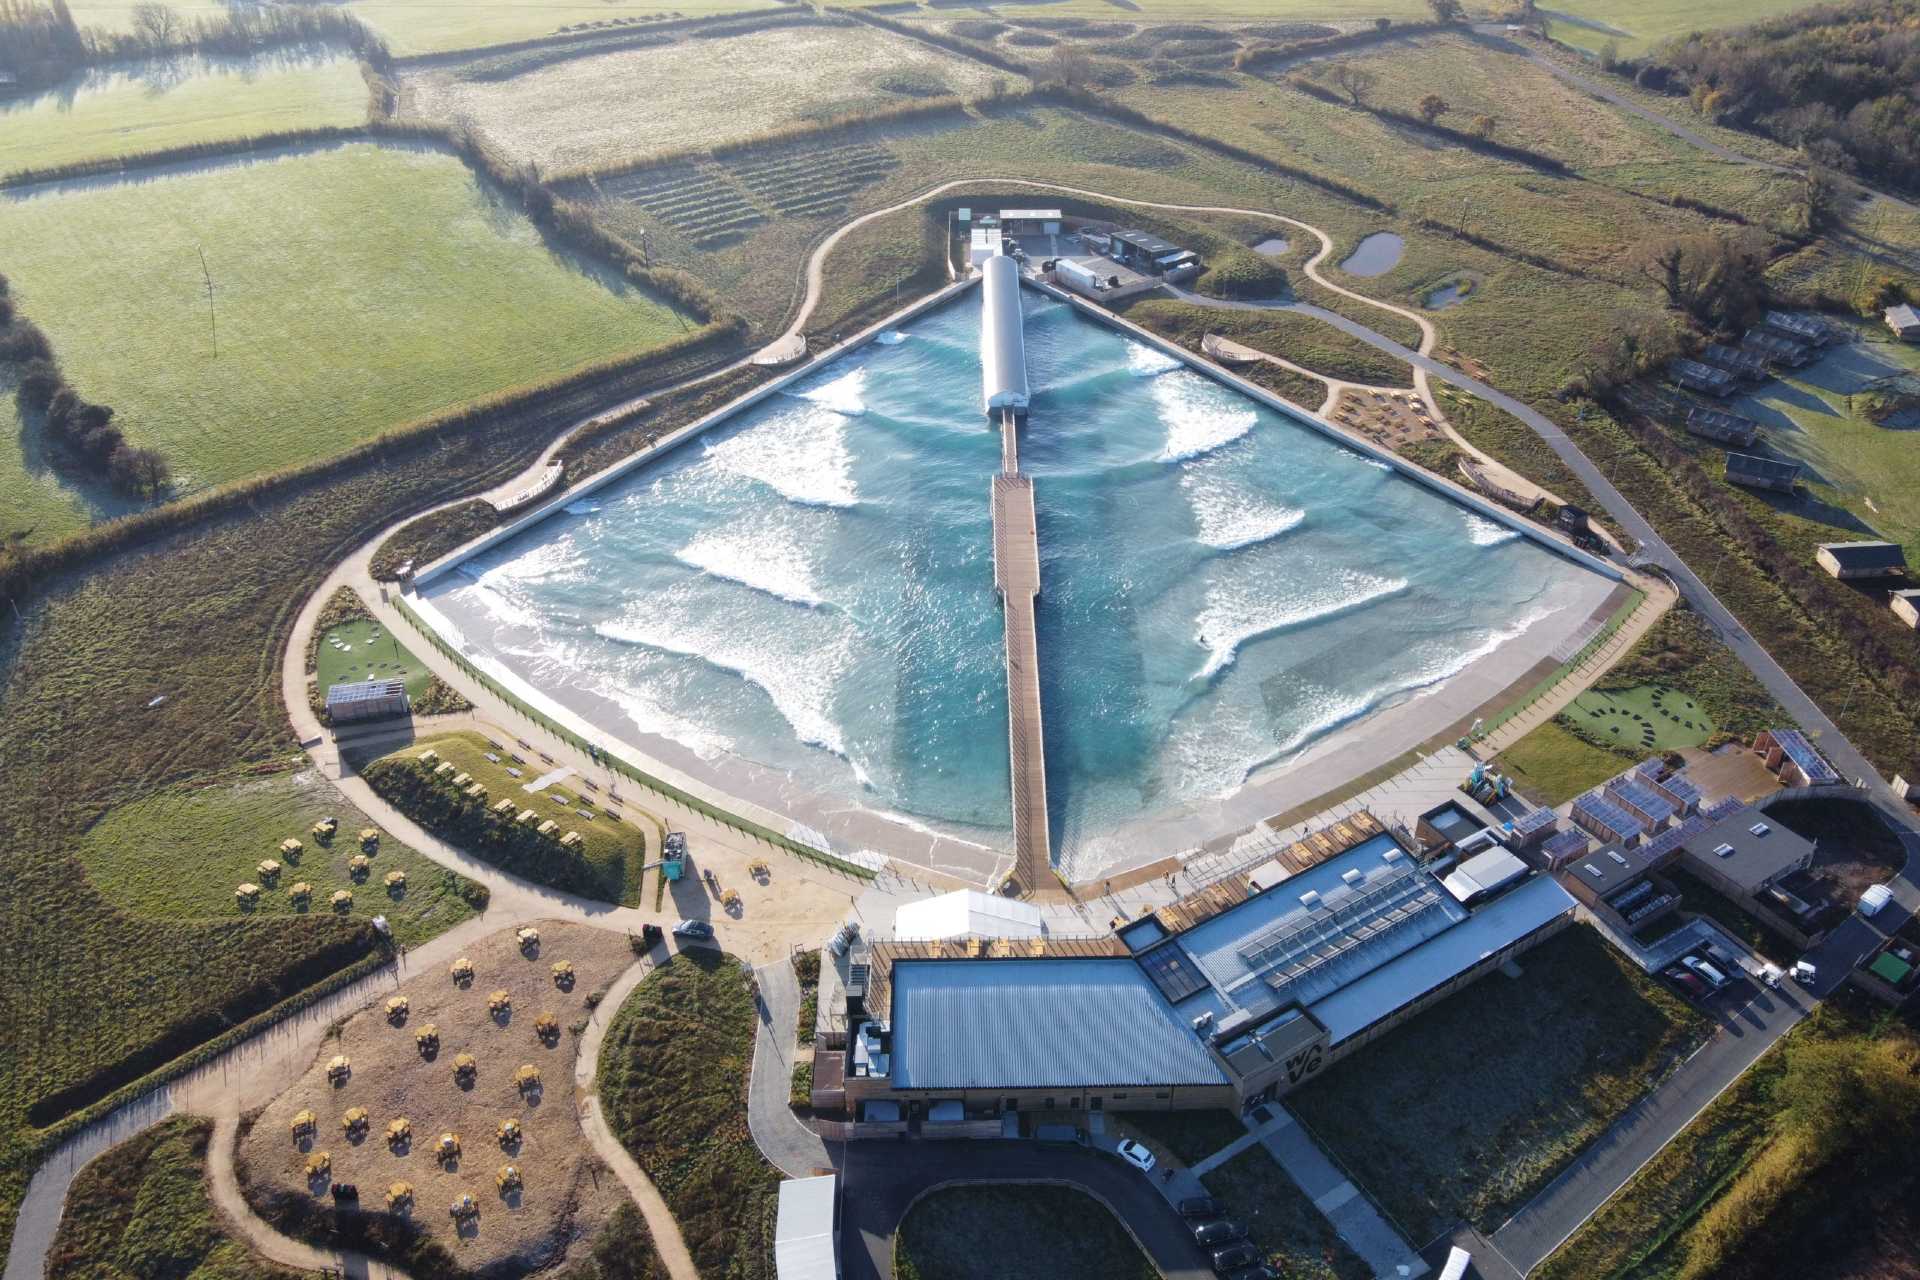 Located in Bristol, founder Nick Hounsfield pioneered The Wave, an inland wave pool, to help increase access to blue spaces and its associated benefits.